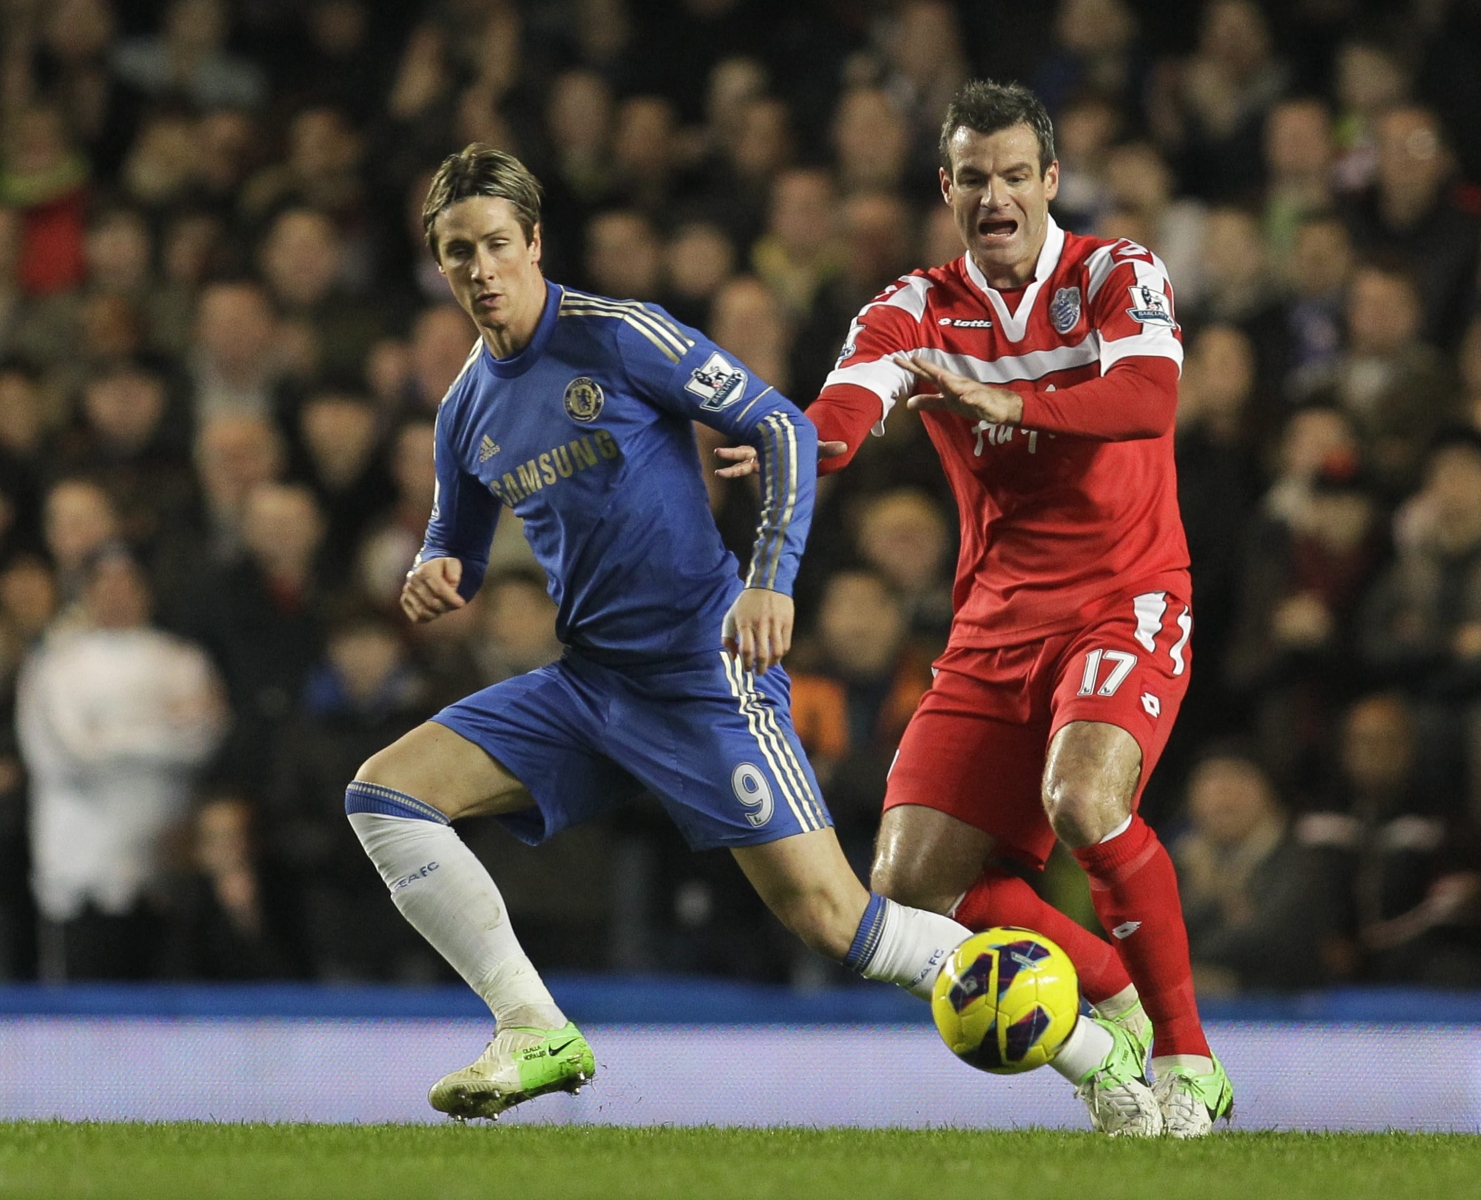 Chelsea's Fernando Torres, left, competes with Queens Park Rangers' Ryan Nelsen during their English Premier League soccer match at Stamford Bridge, London, Wednesday, Jan. 2, 2013. (AP Photo/Sang Tan)